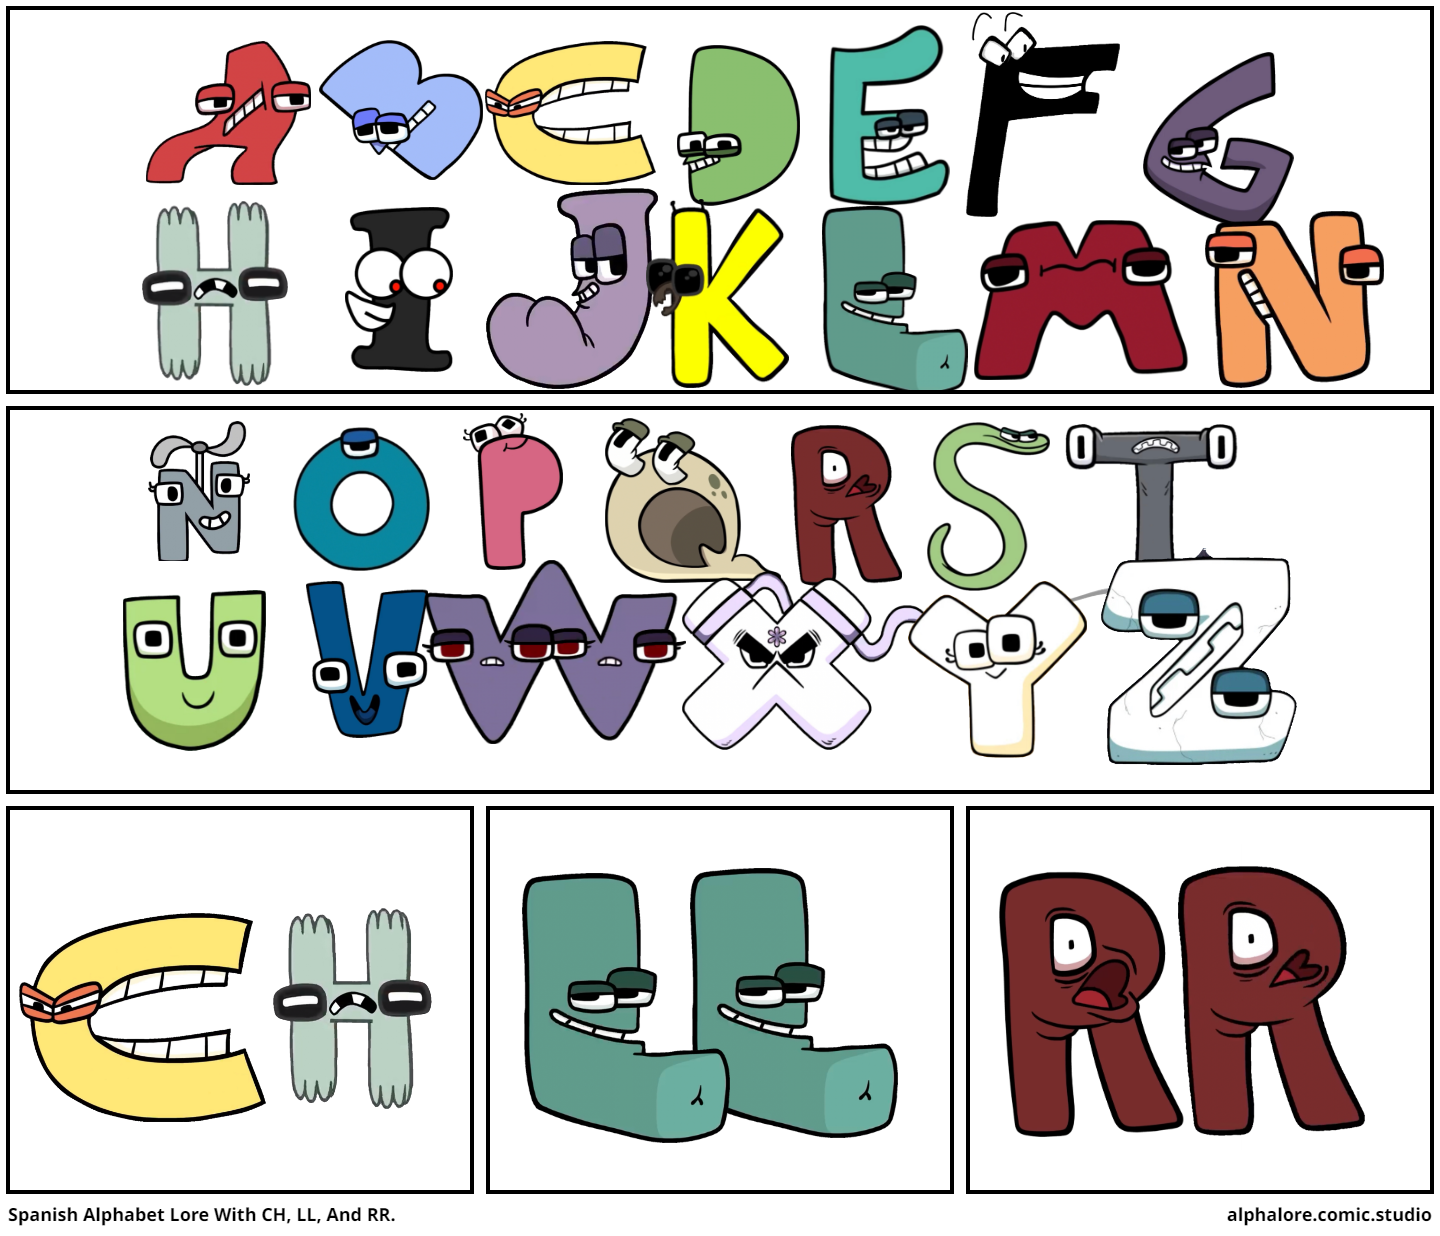 spanish-alphabet-lore-with-ch-ll-and-rr-comic-studio